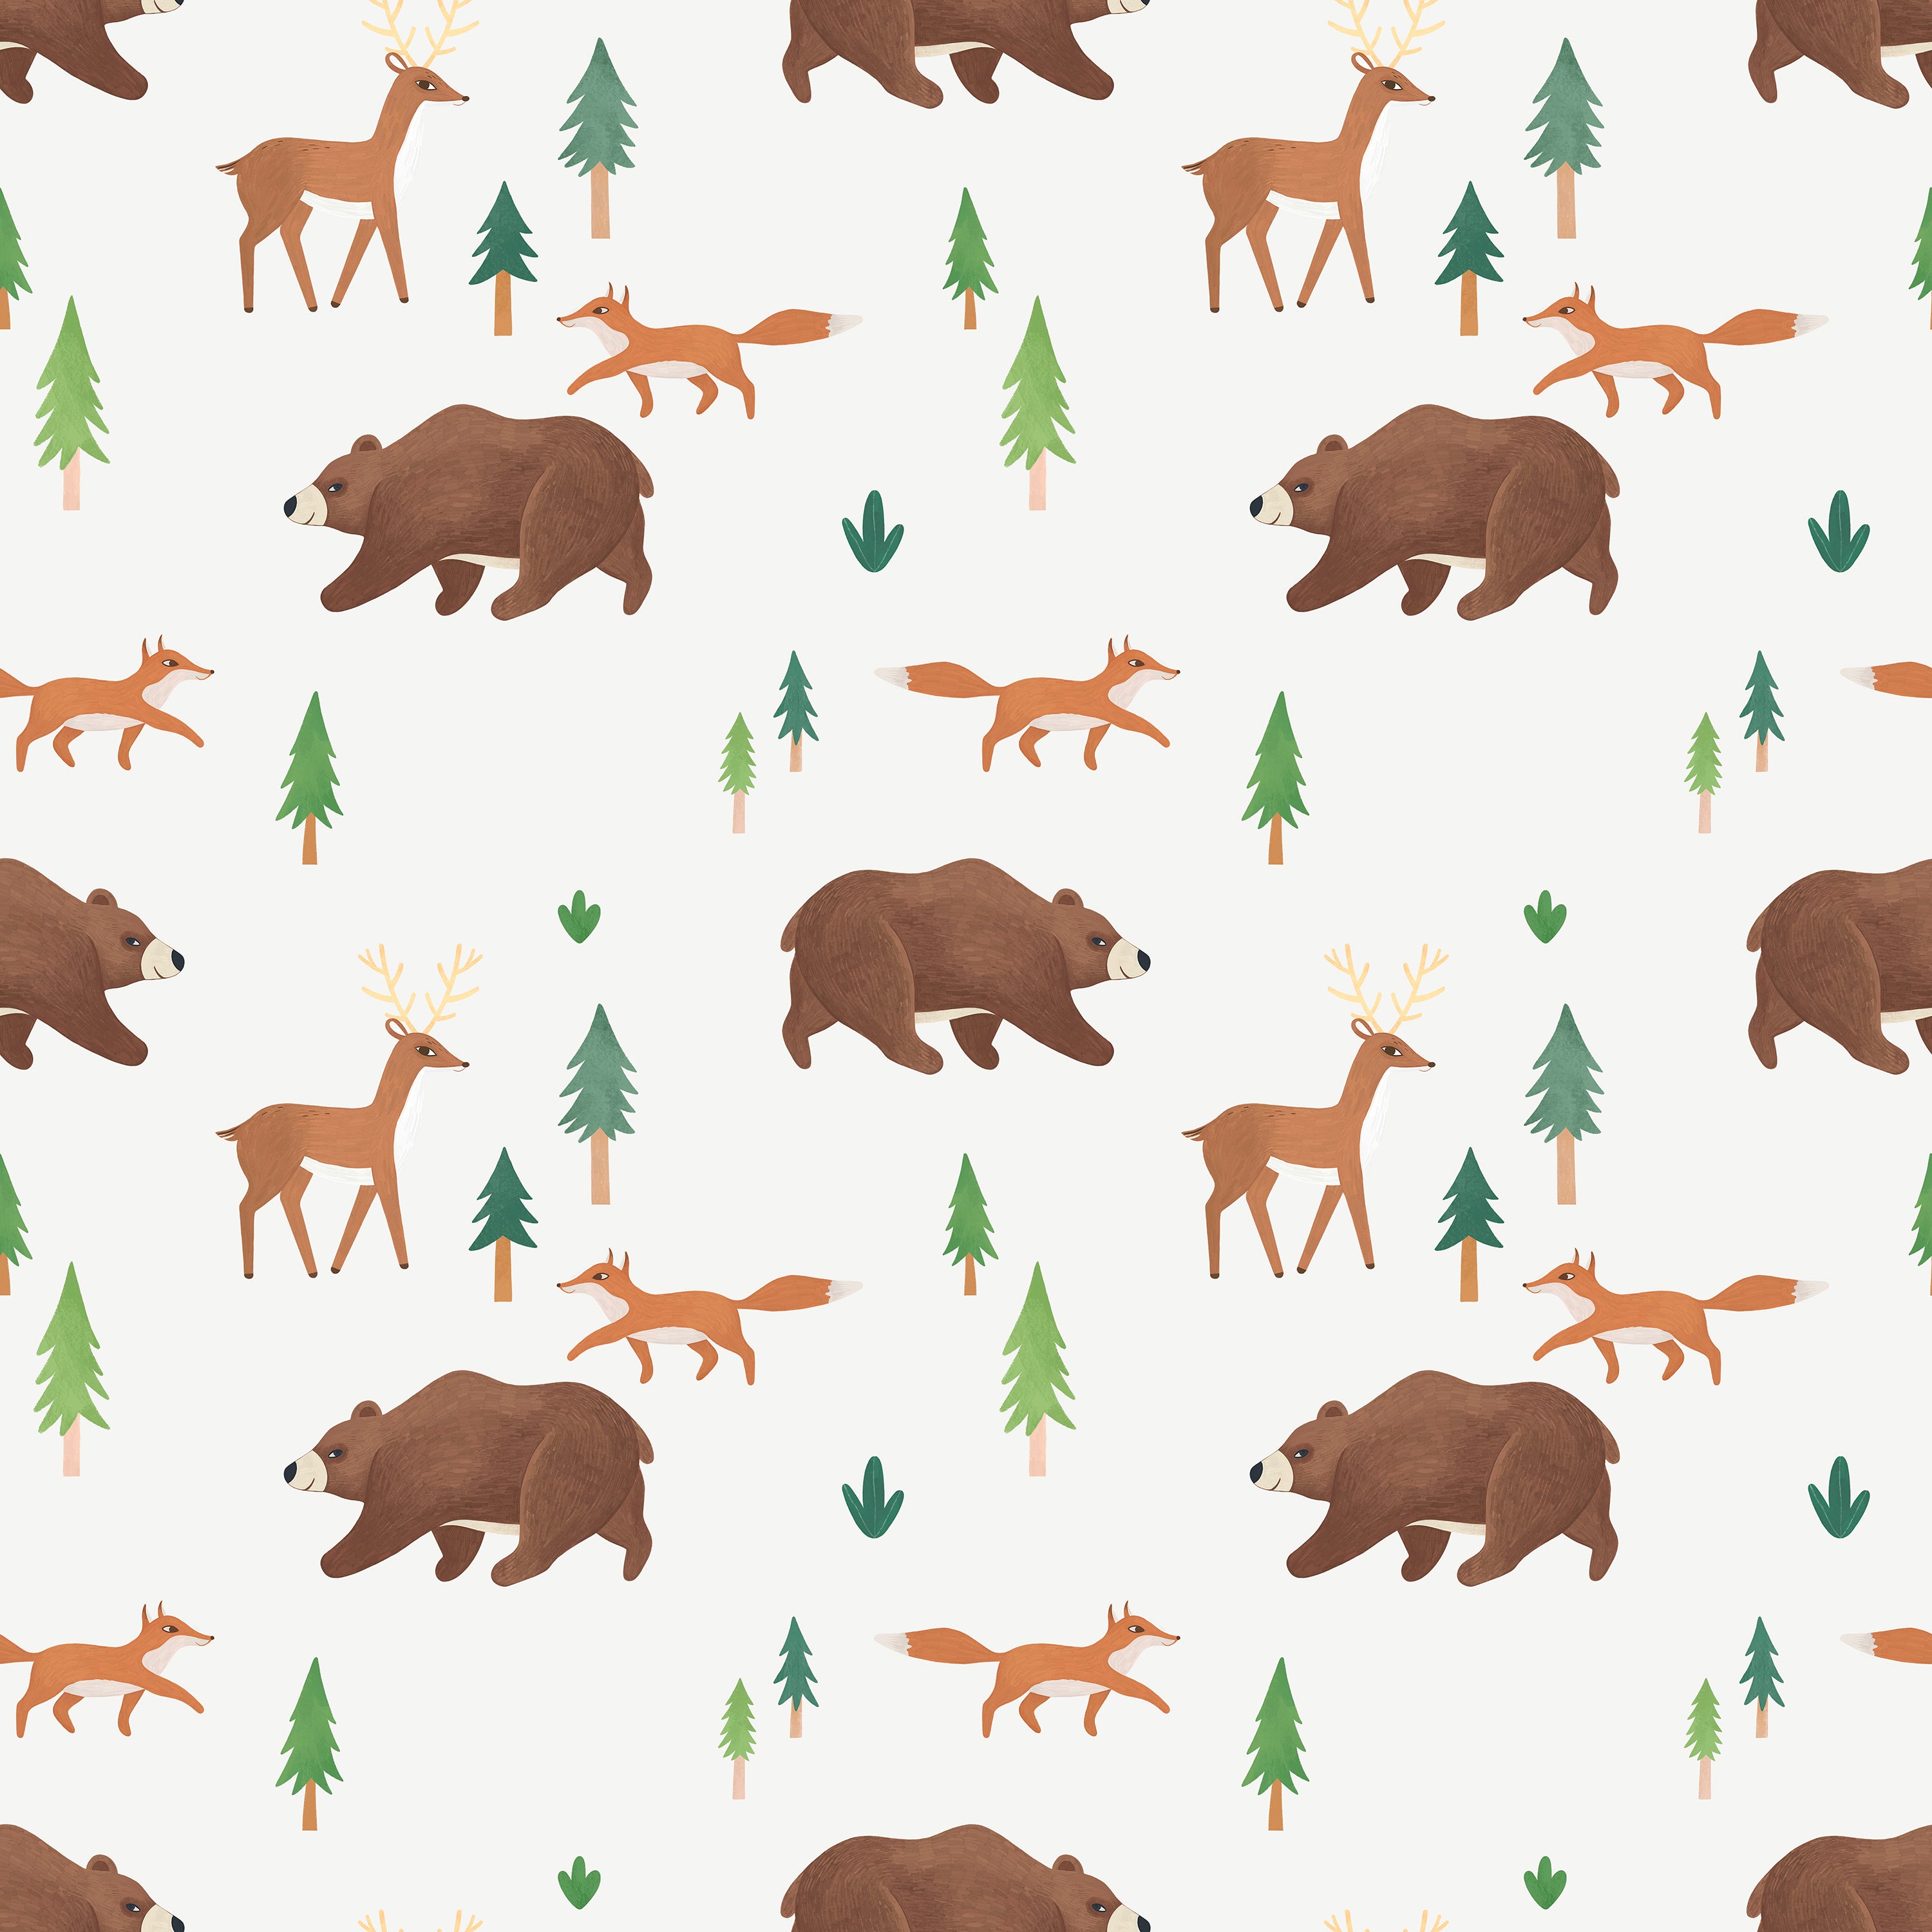 Close-up of a playful wallpaper pattern showcasing illustrated brown bears, deer, and foxes interspersed with small pine trees and green foliage. The design captures a lively forest scene in soft, earthy tones, perfect for a nature-themed nursery or children's room.